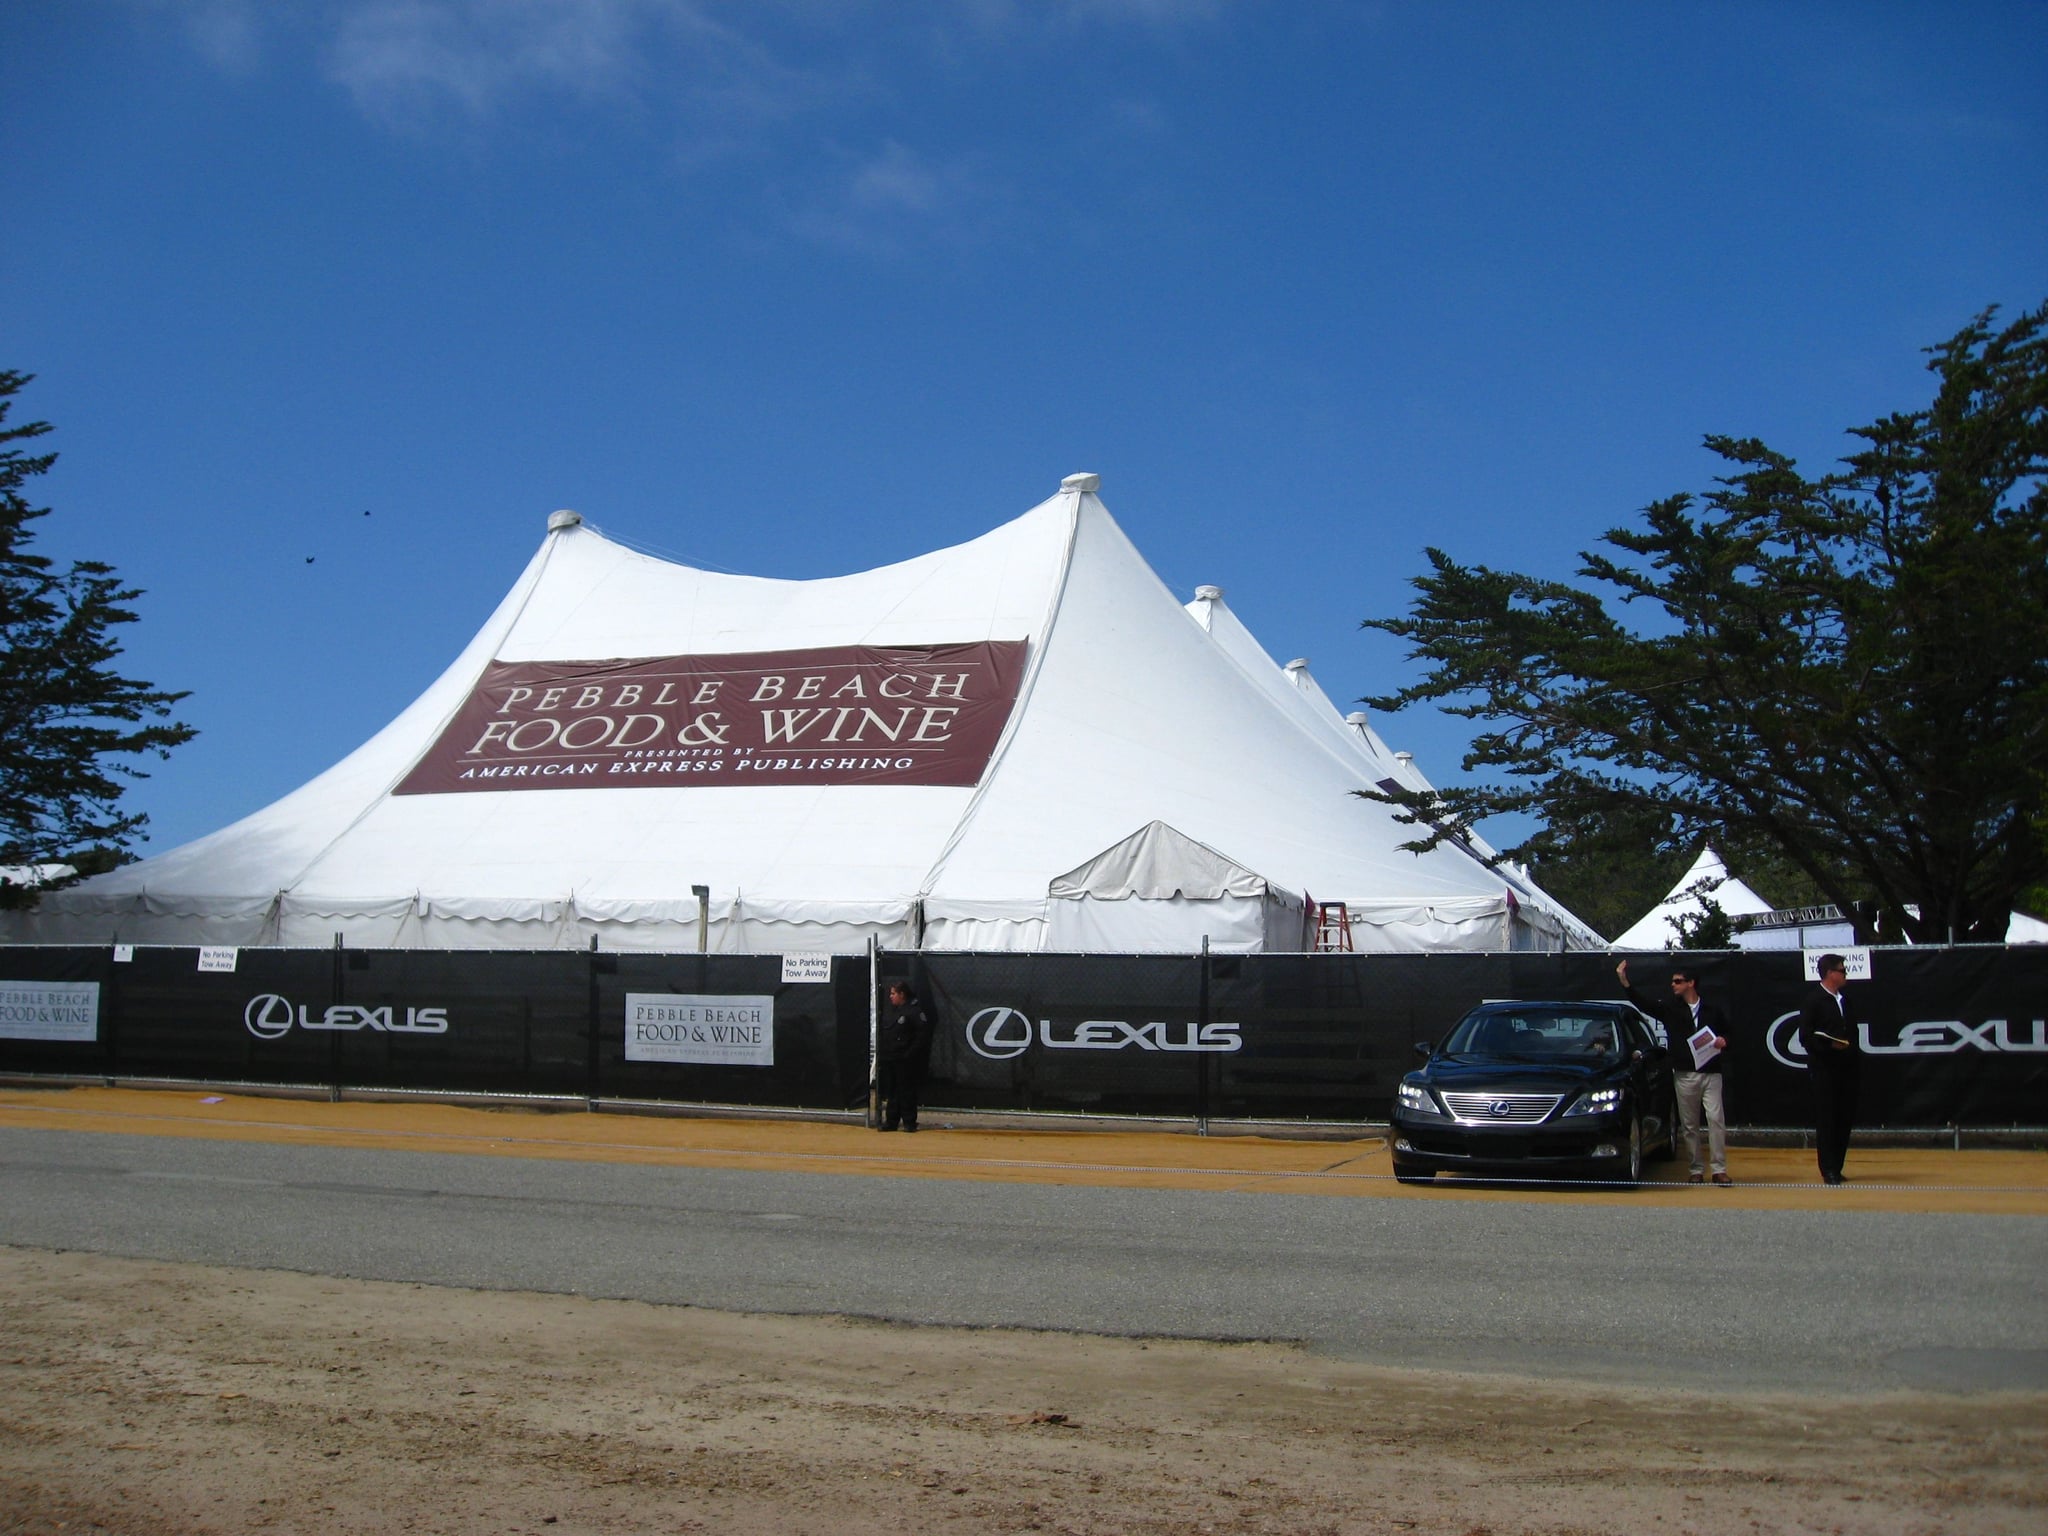 Take a Peek at Sunday's Grand Tasting Event at the First Annual Pebble